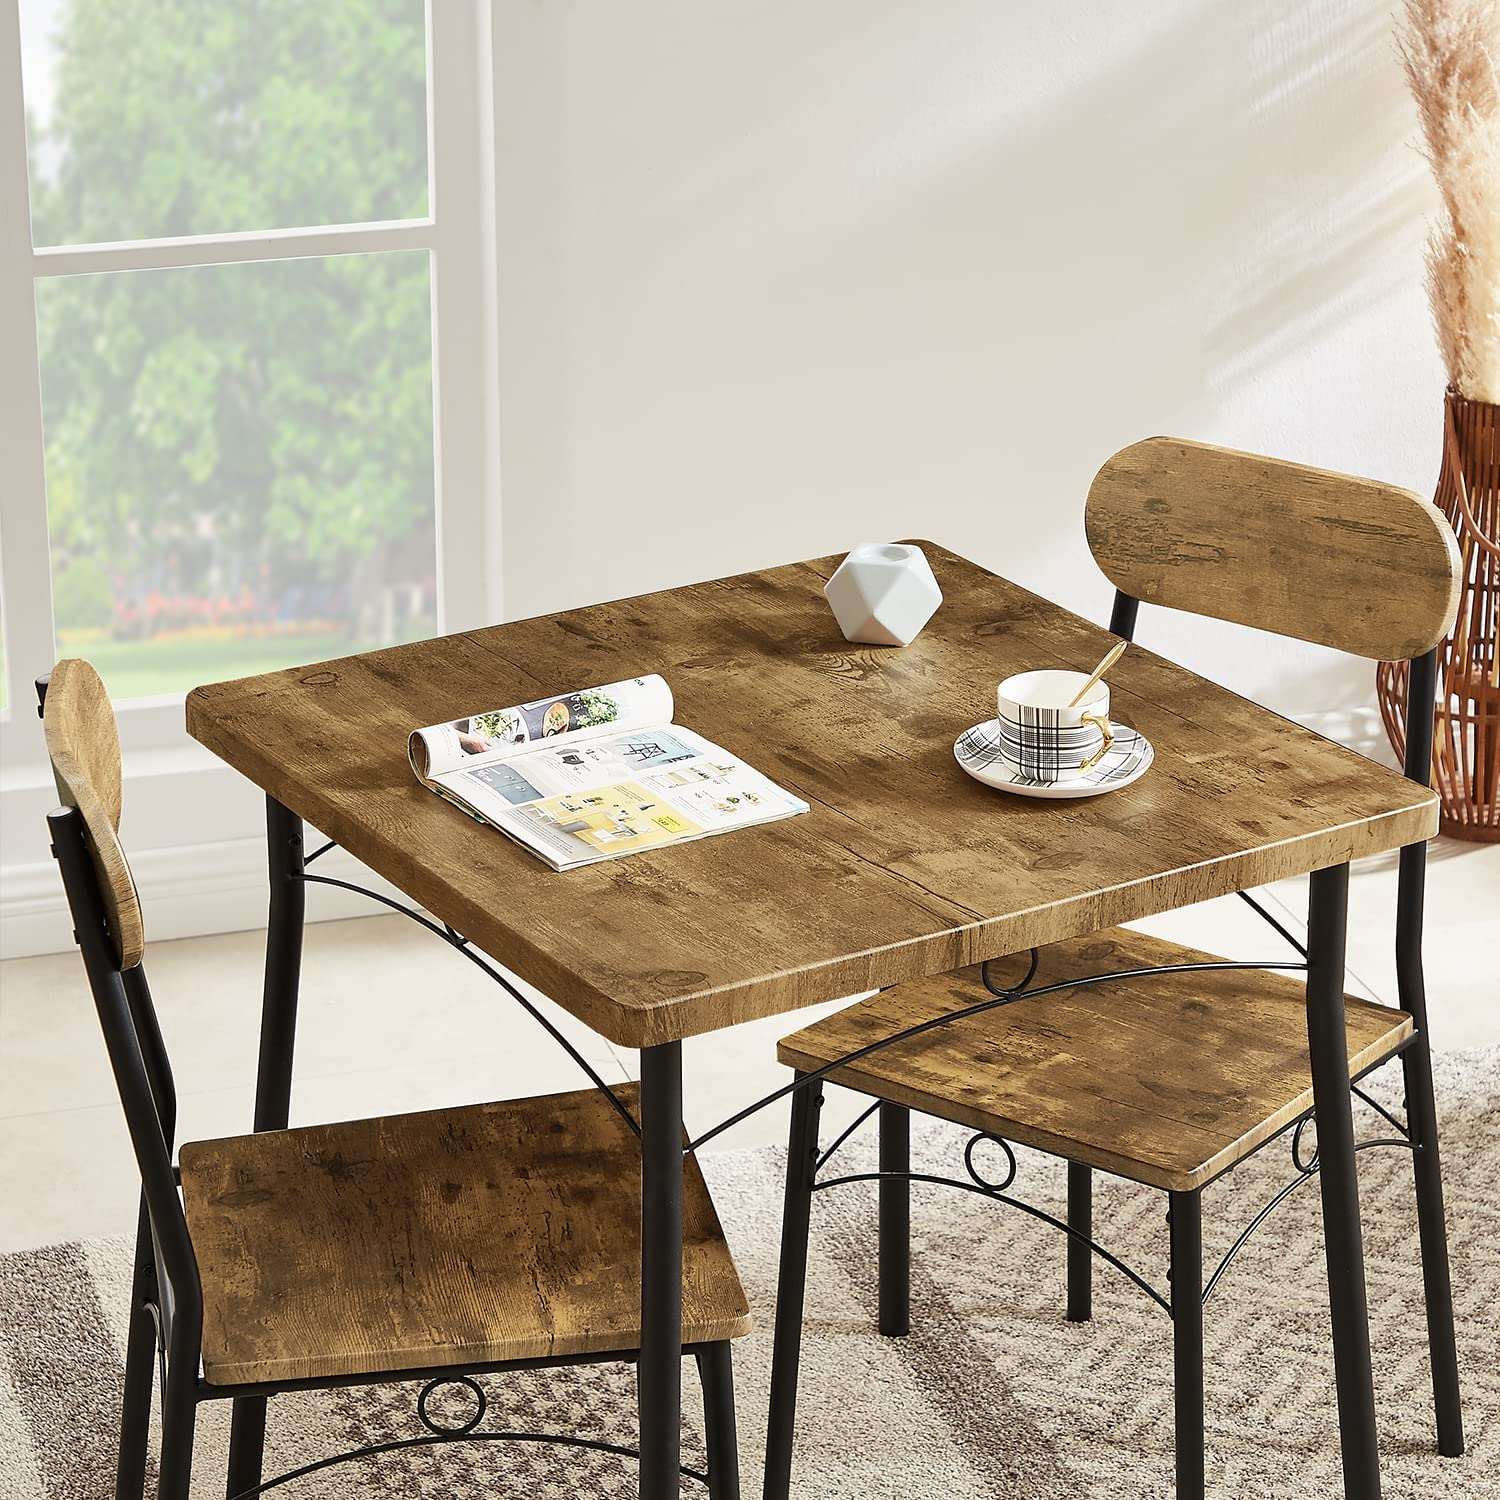 VECELO 3-Piece Dining Room Set Wooden Square Dining Table with 2 Chairs for Kitchen, dining room